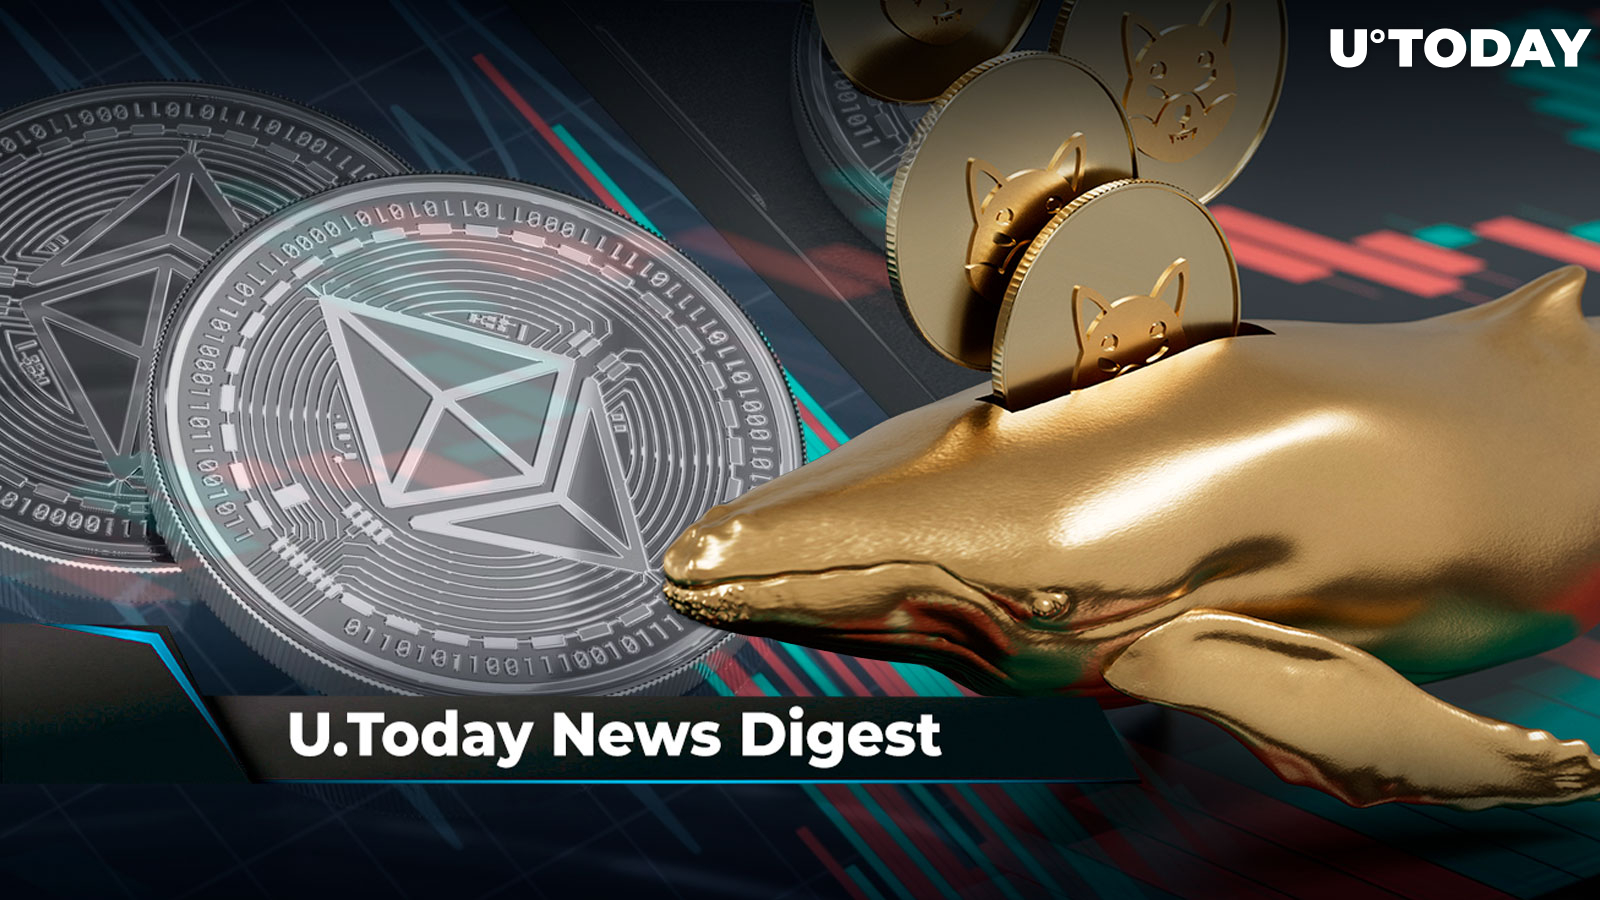 ETH Surged Past $1,700, Ripple General Counsel Says SEC “Bullying” Crypto, SHIB Worth $3 Million Bought by This ETH Whale: Crypto News Digest by U.Today